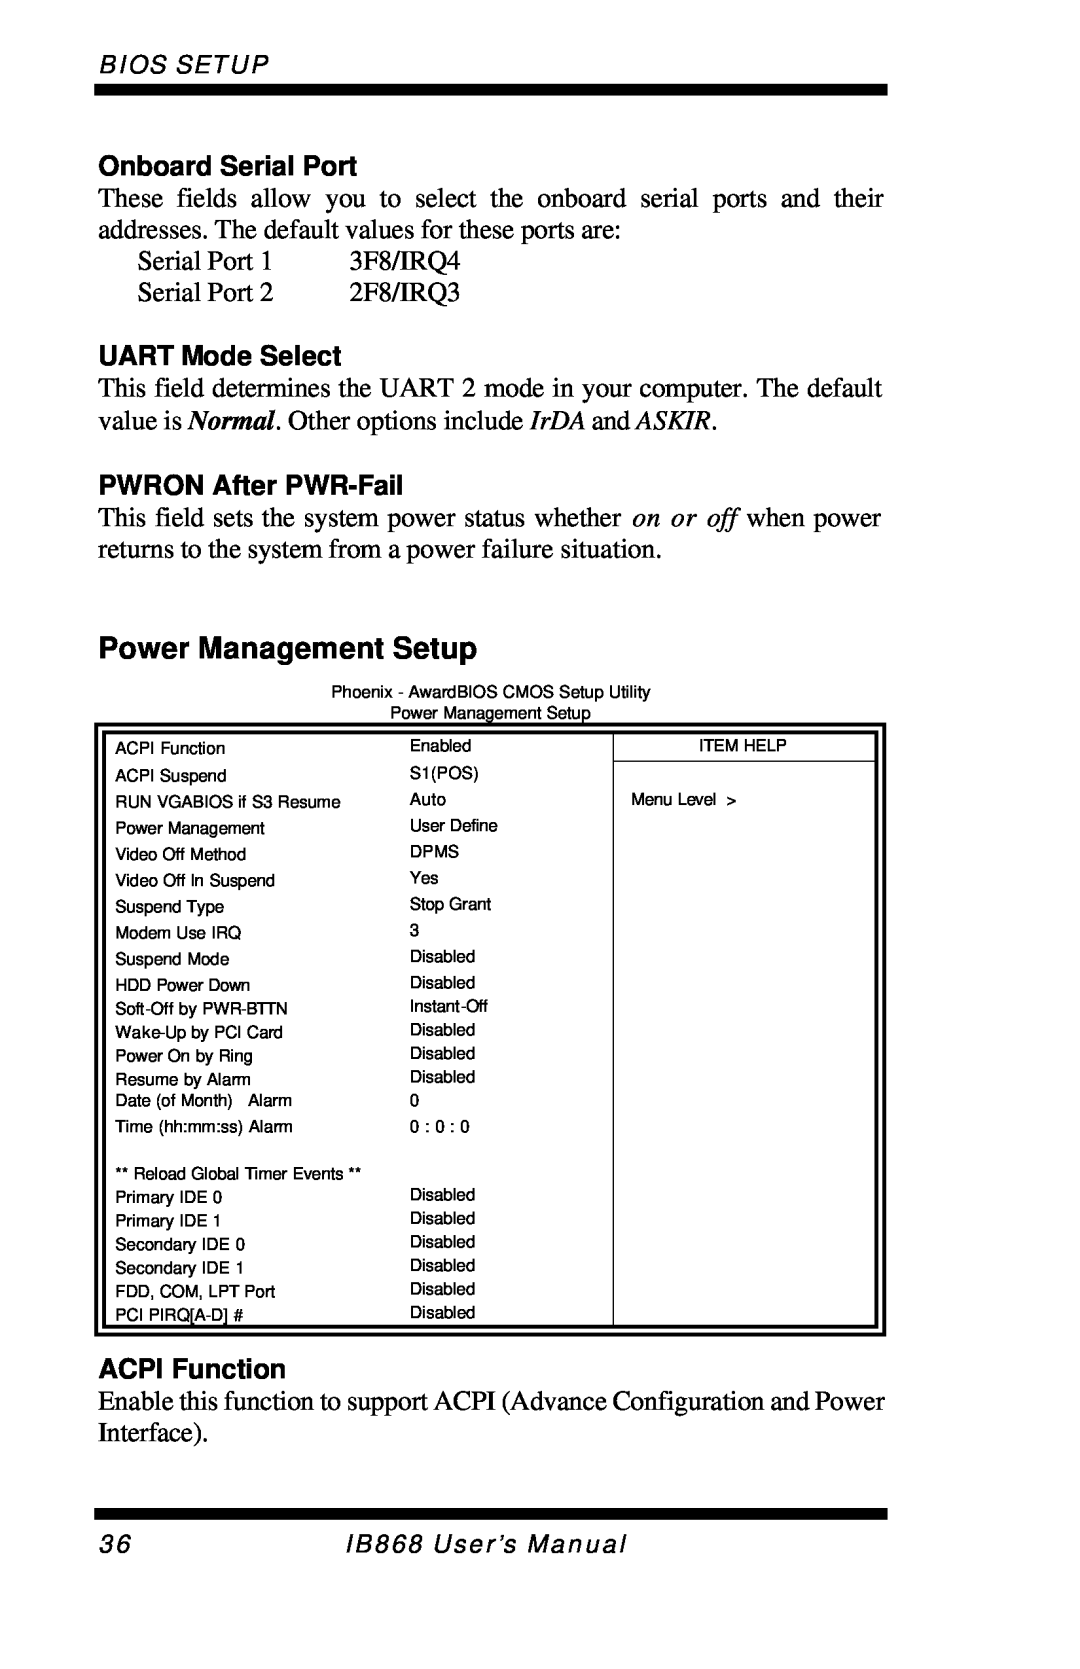 Intel IB868 user manual Power Management Setup, Onboard Serial Port, UART Mode Select, PWRON After PWR-Fail, ACPI Function 